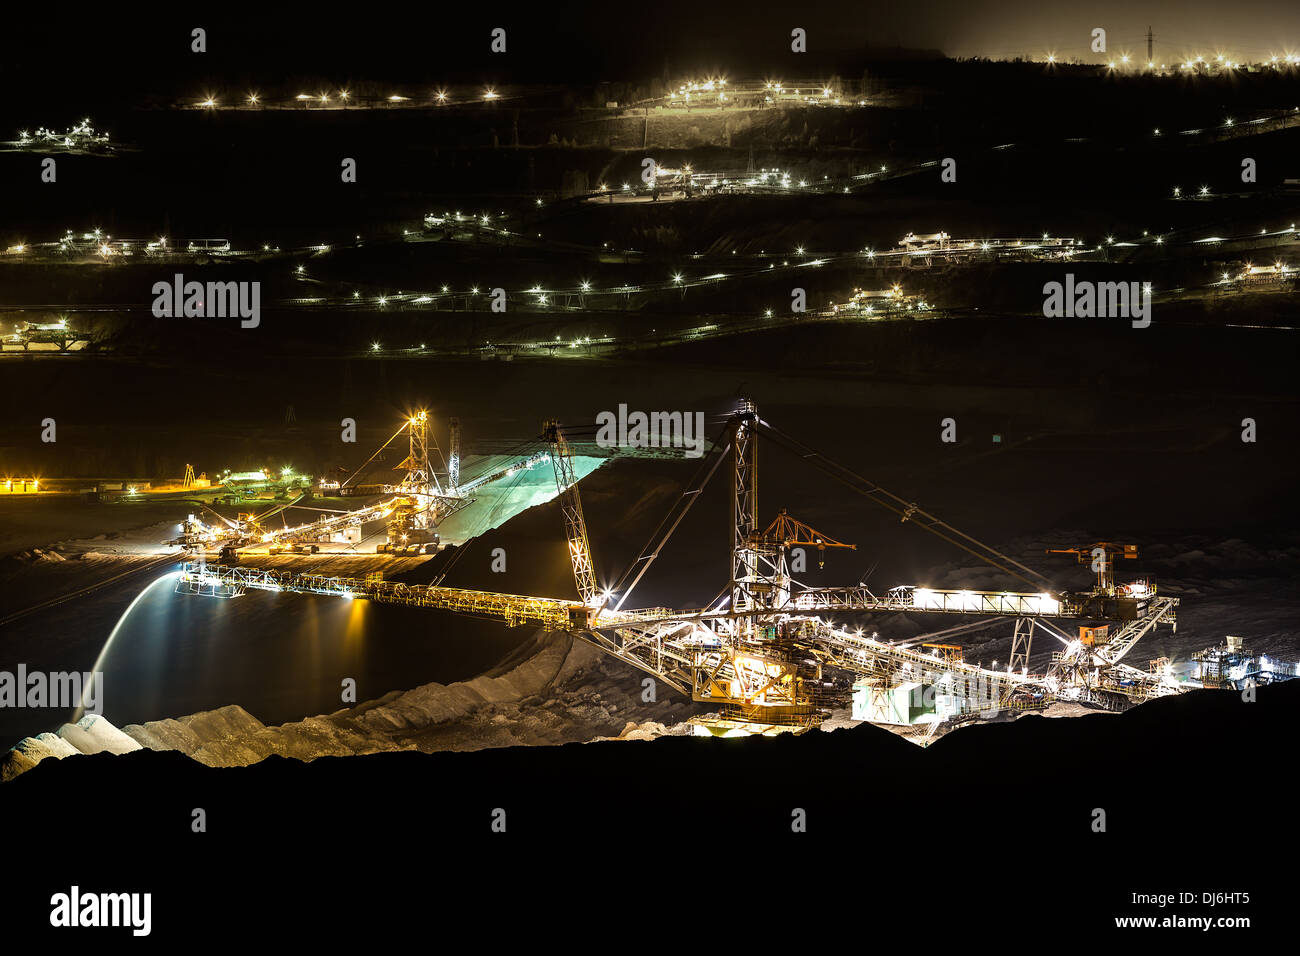 Coal mining in an open pit - evening photo Stock Photo